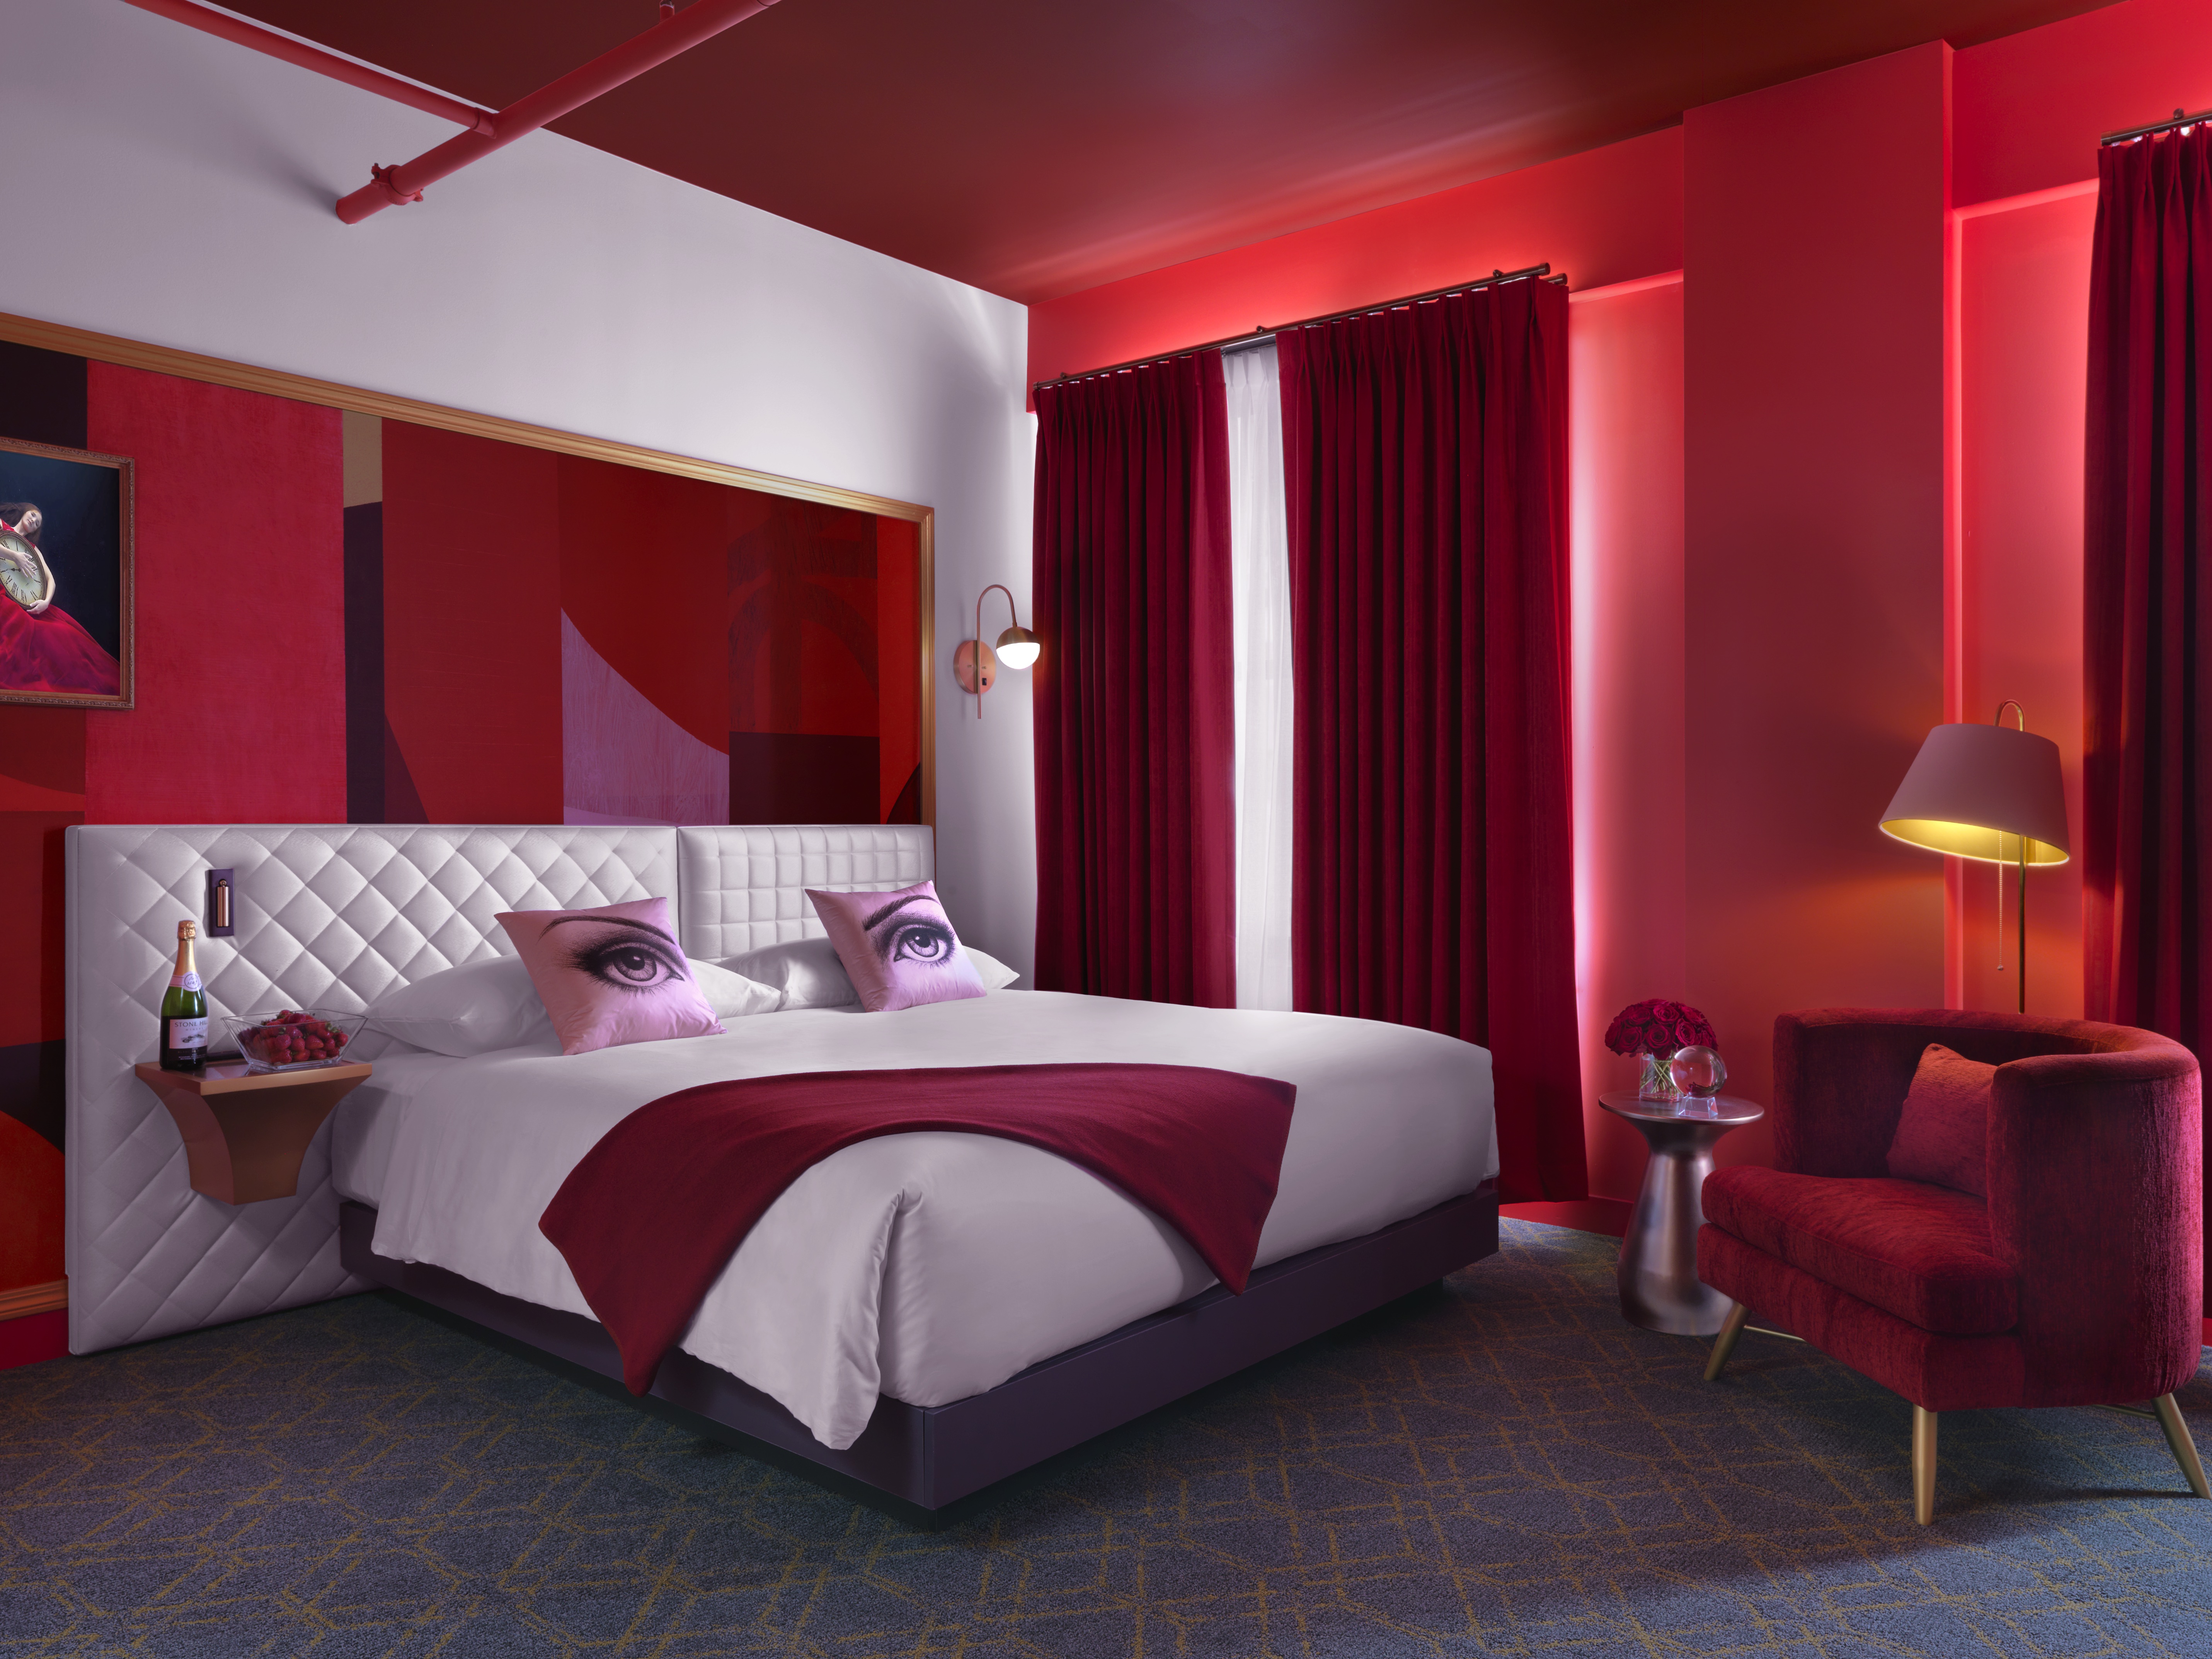 Match Your Mood To Your Room At St. Louis' New Angad Arts Hotel